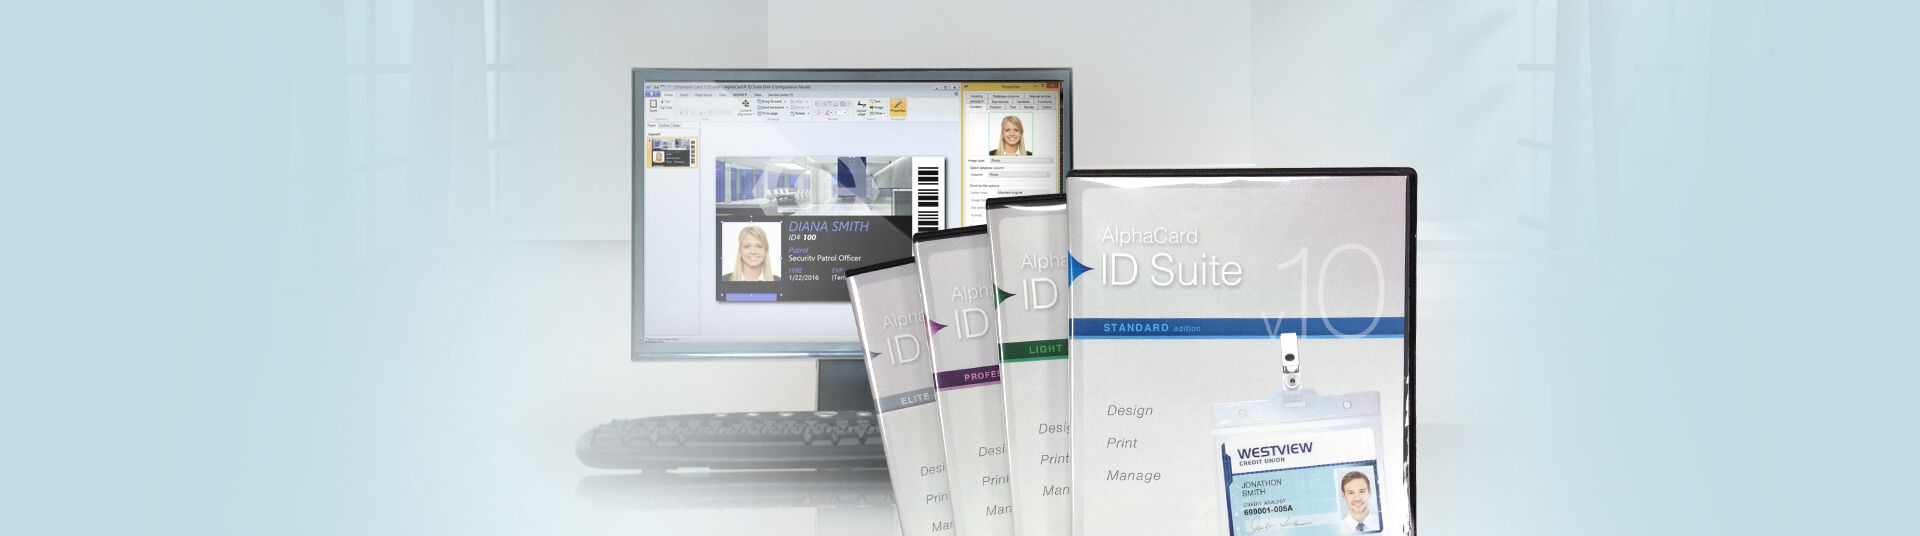 Common Features of Identification Software